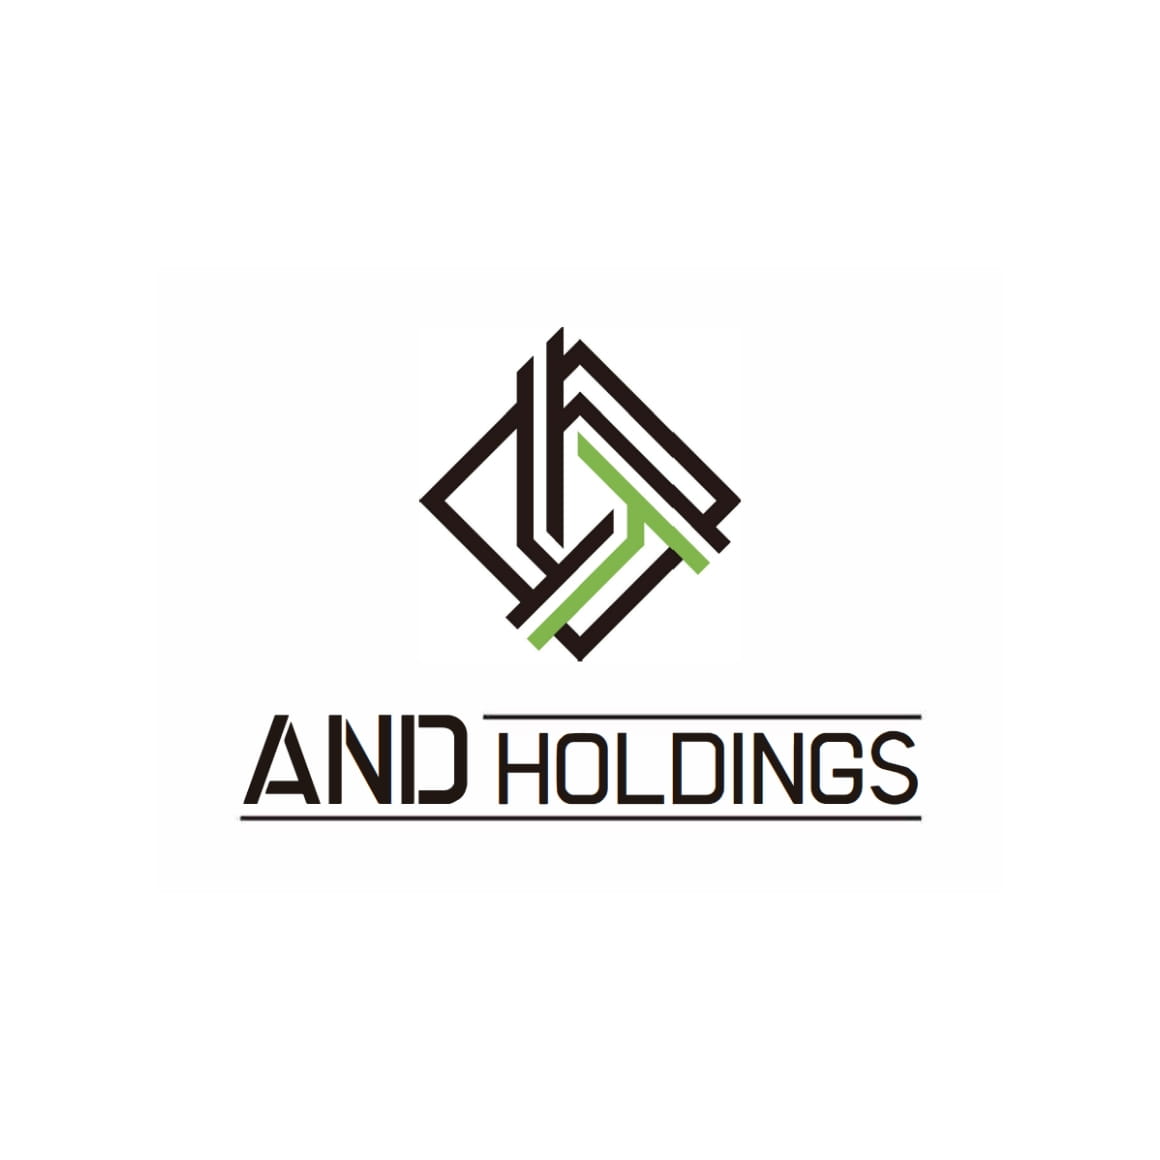 ANDholdings